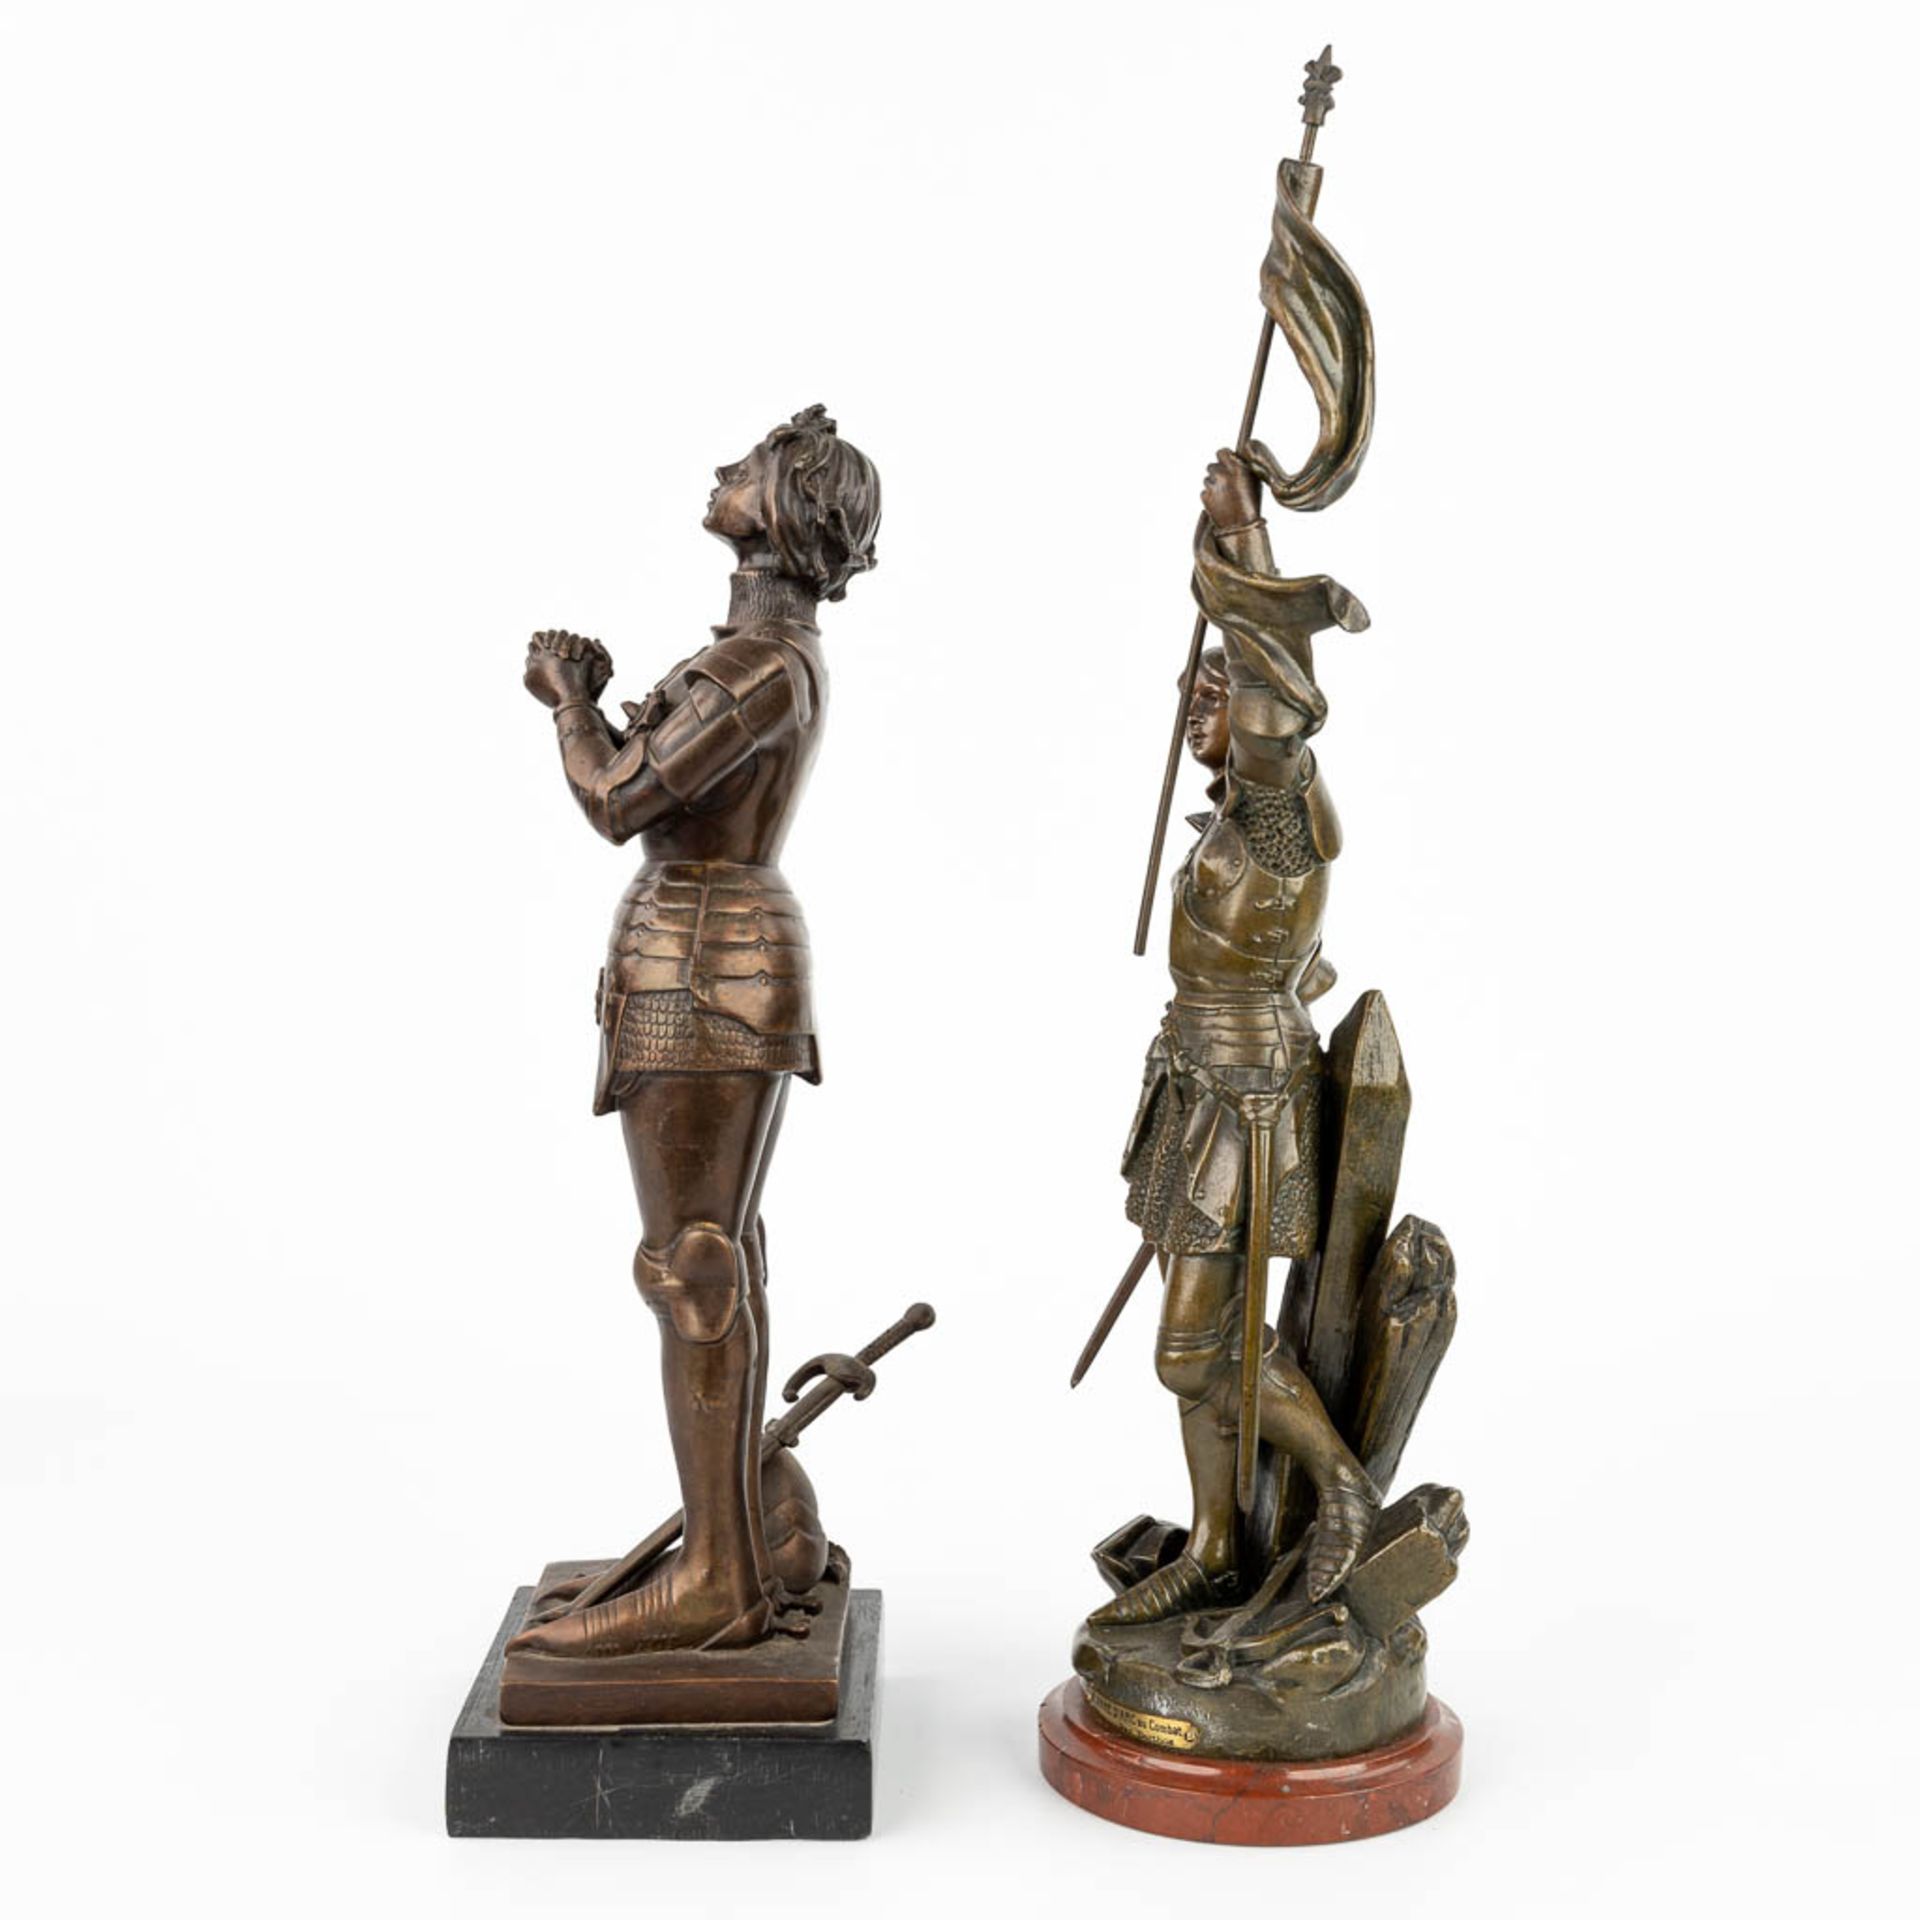 A collection of 2 statues of Jeanne D'arc made of spelter and bronze. (H:50cm) - Image 2 of 12